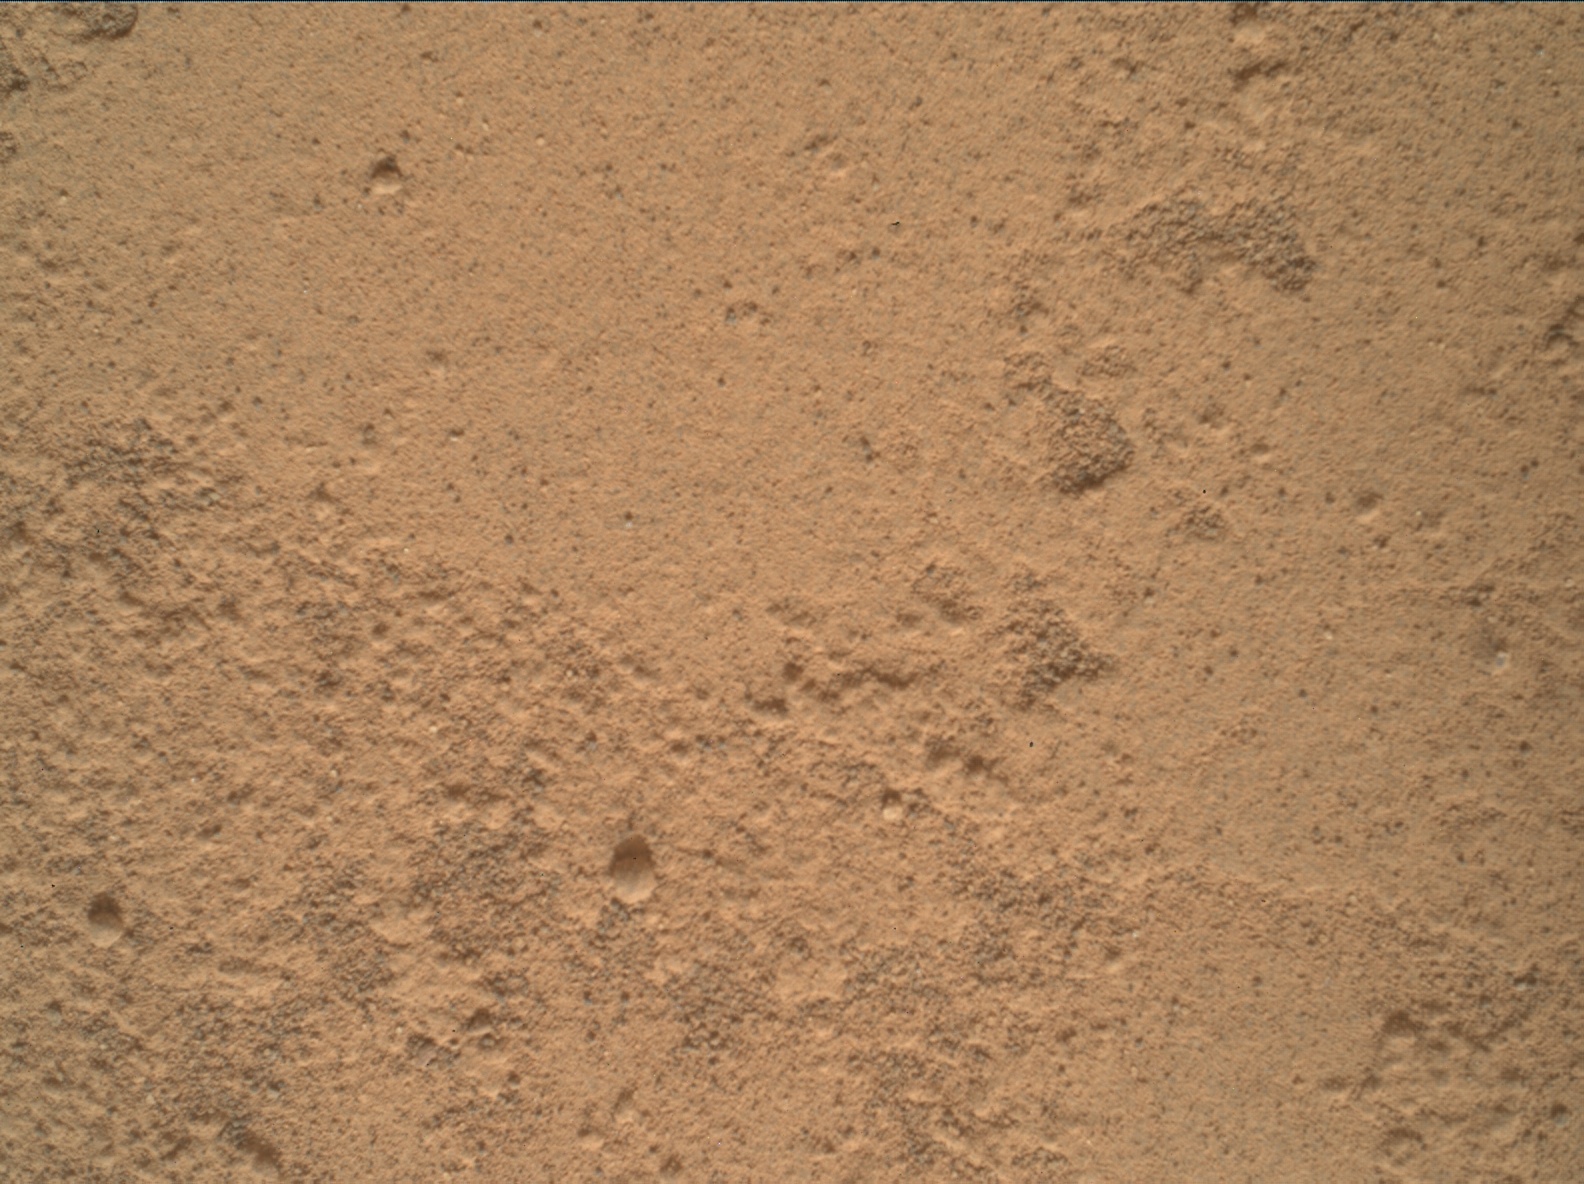 Nasa's Mars rover Curiosity acquired this image using its Mars Hand Lens Imager (MAHLI) on Sol 3630